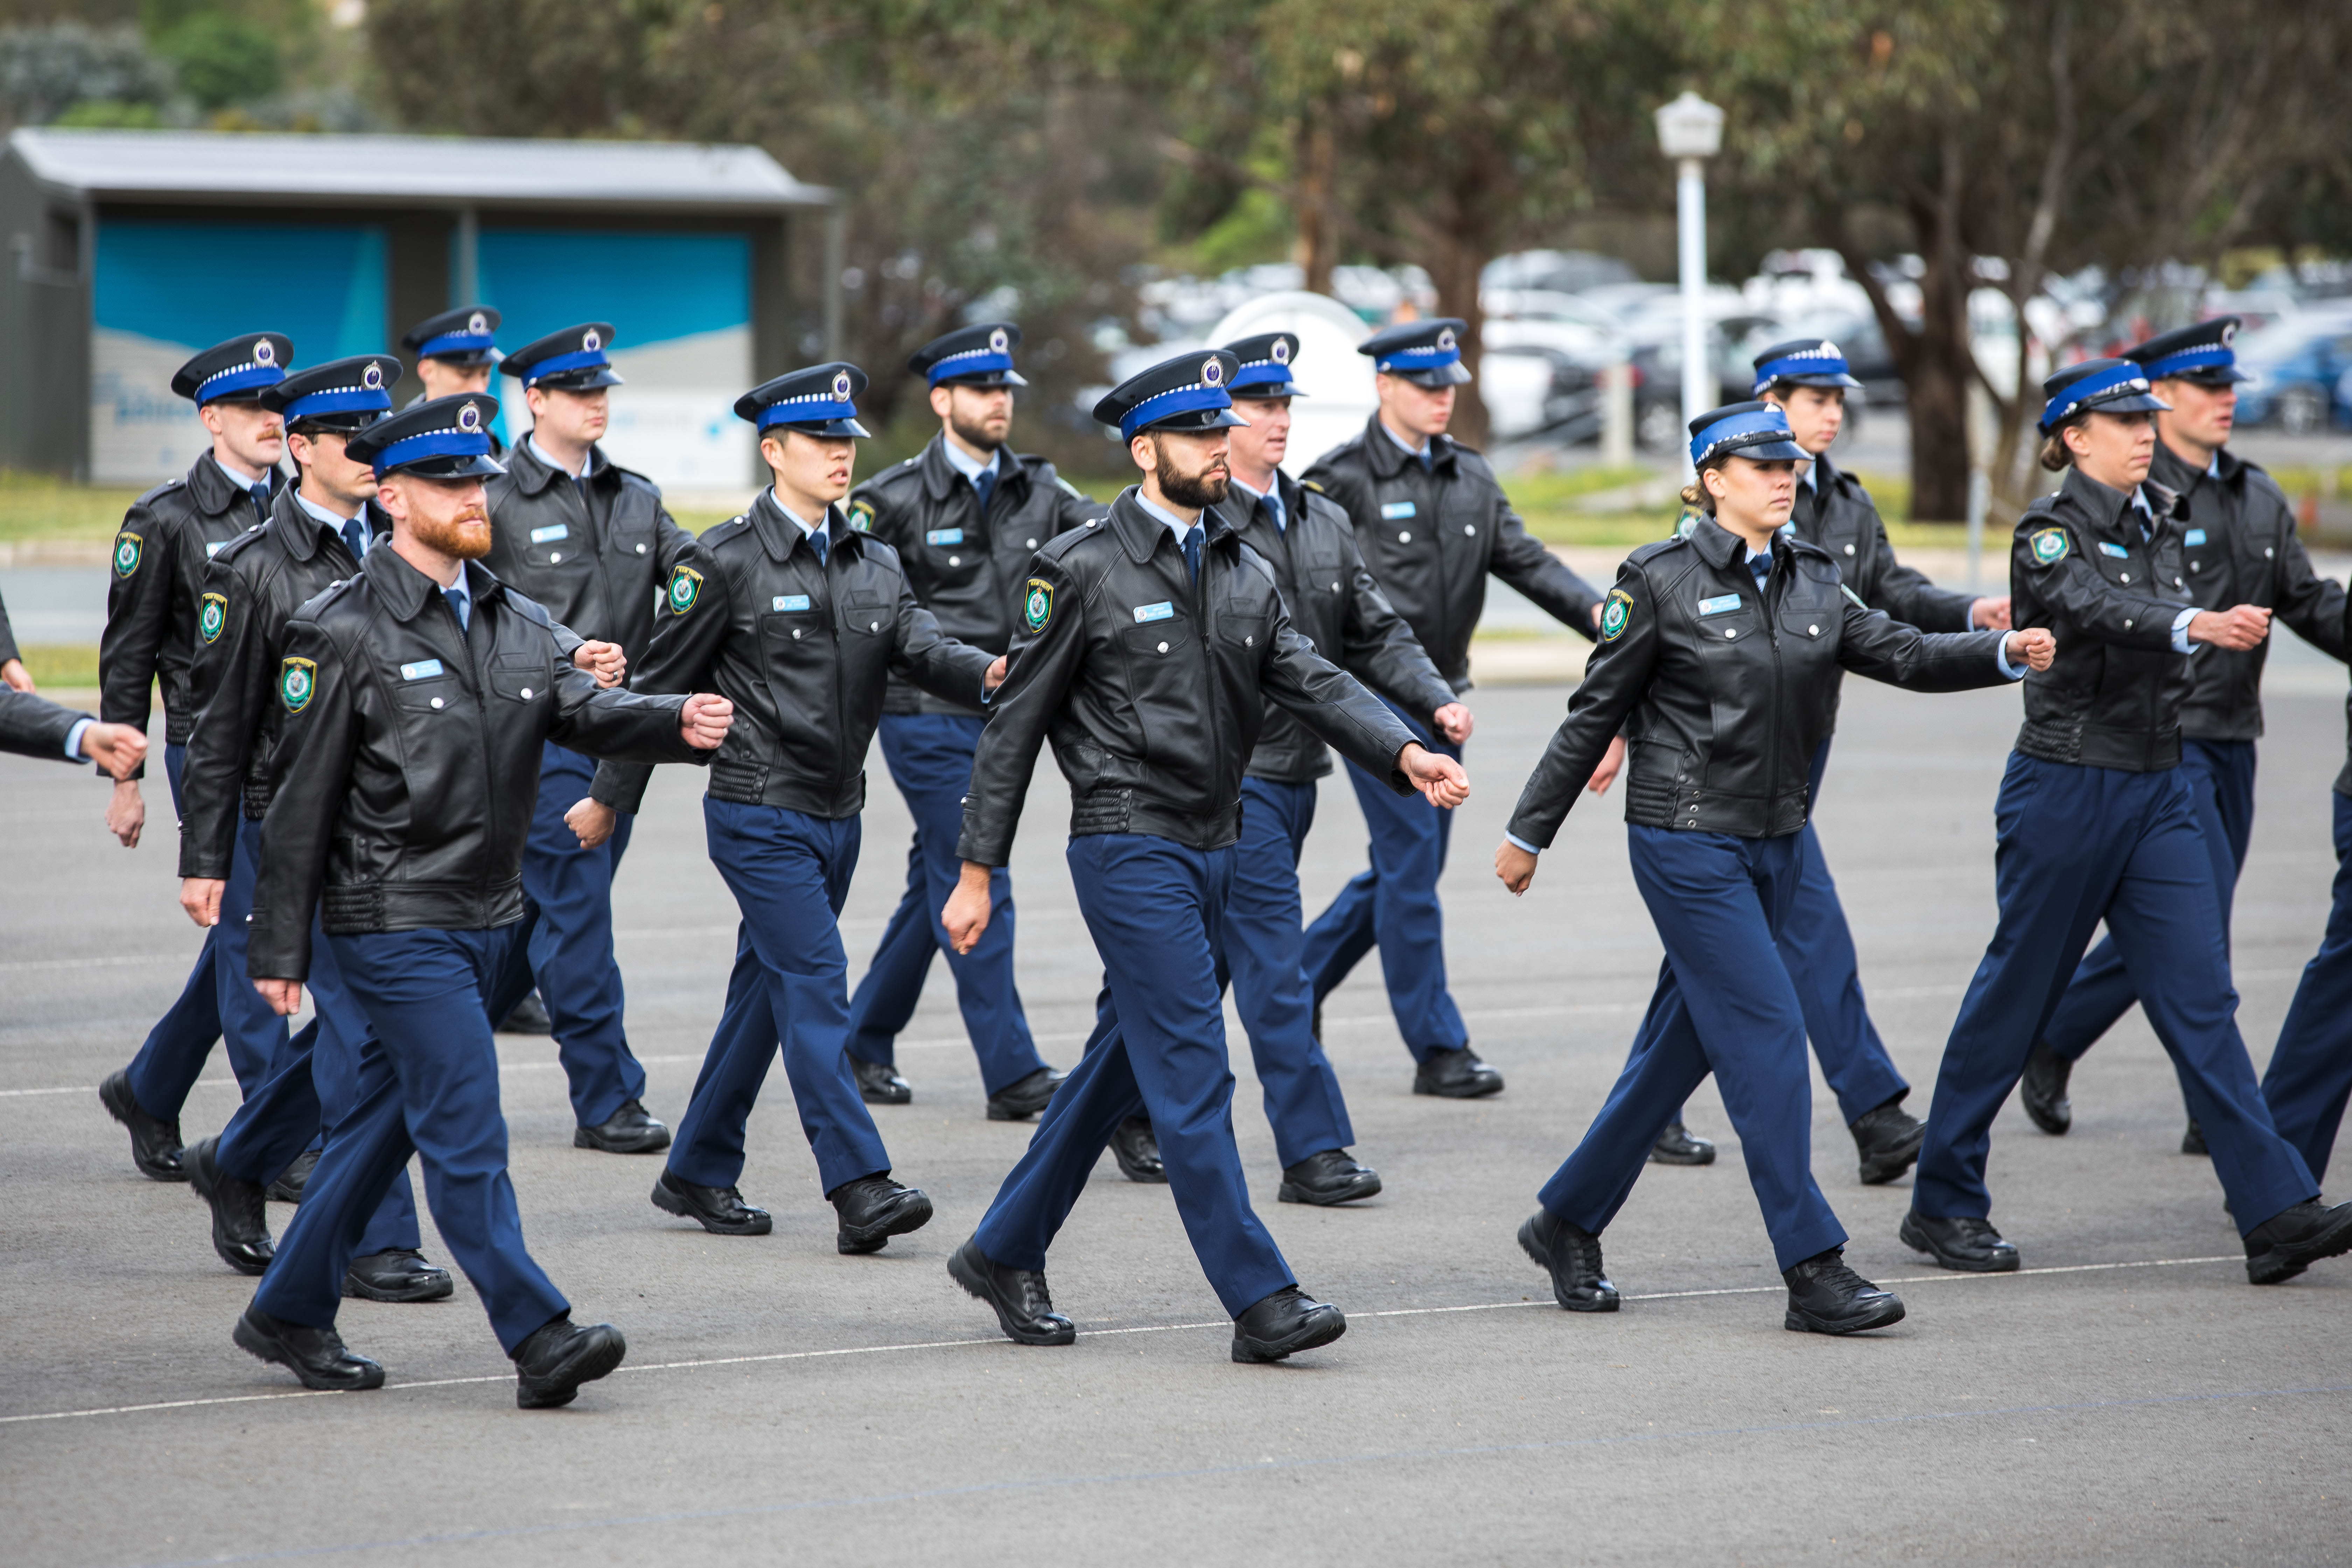 NSW Police welcomes 192 new recruits at 'restricted' ceremony in Goulburn